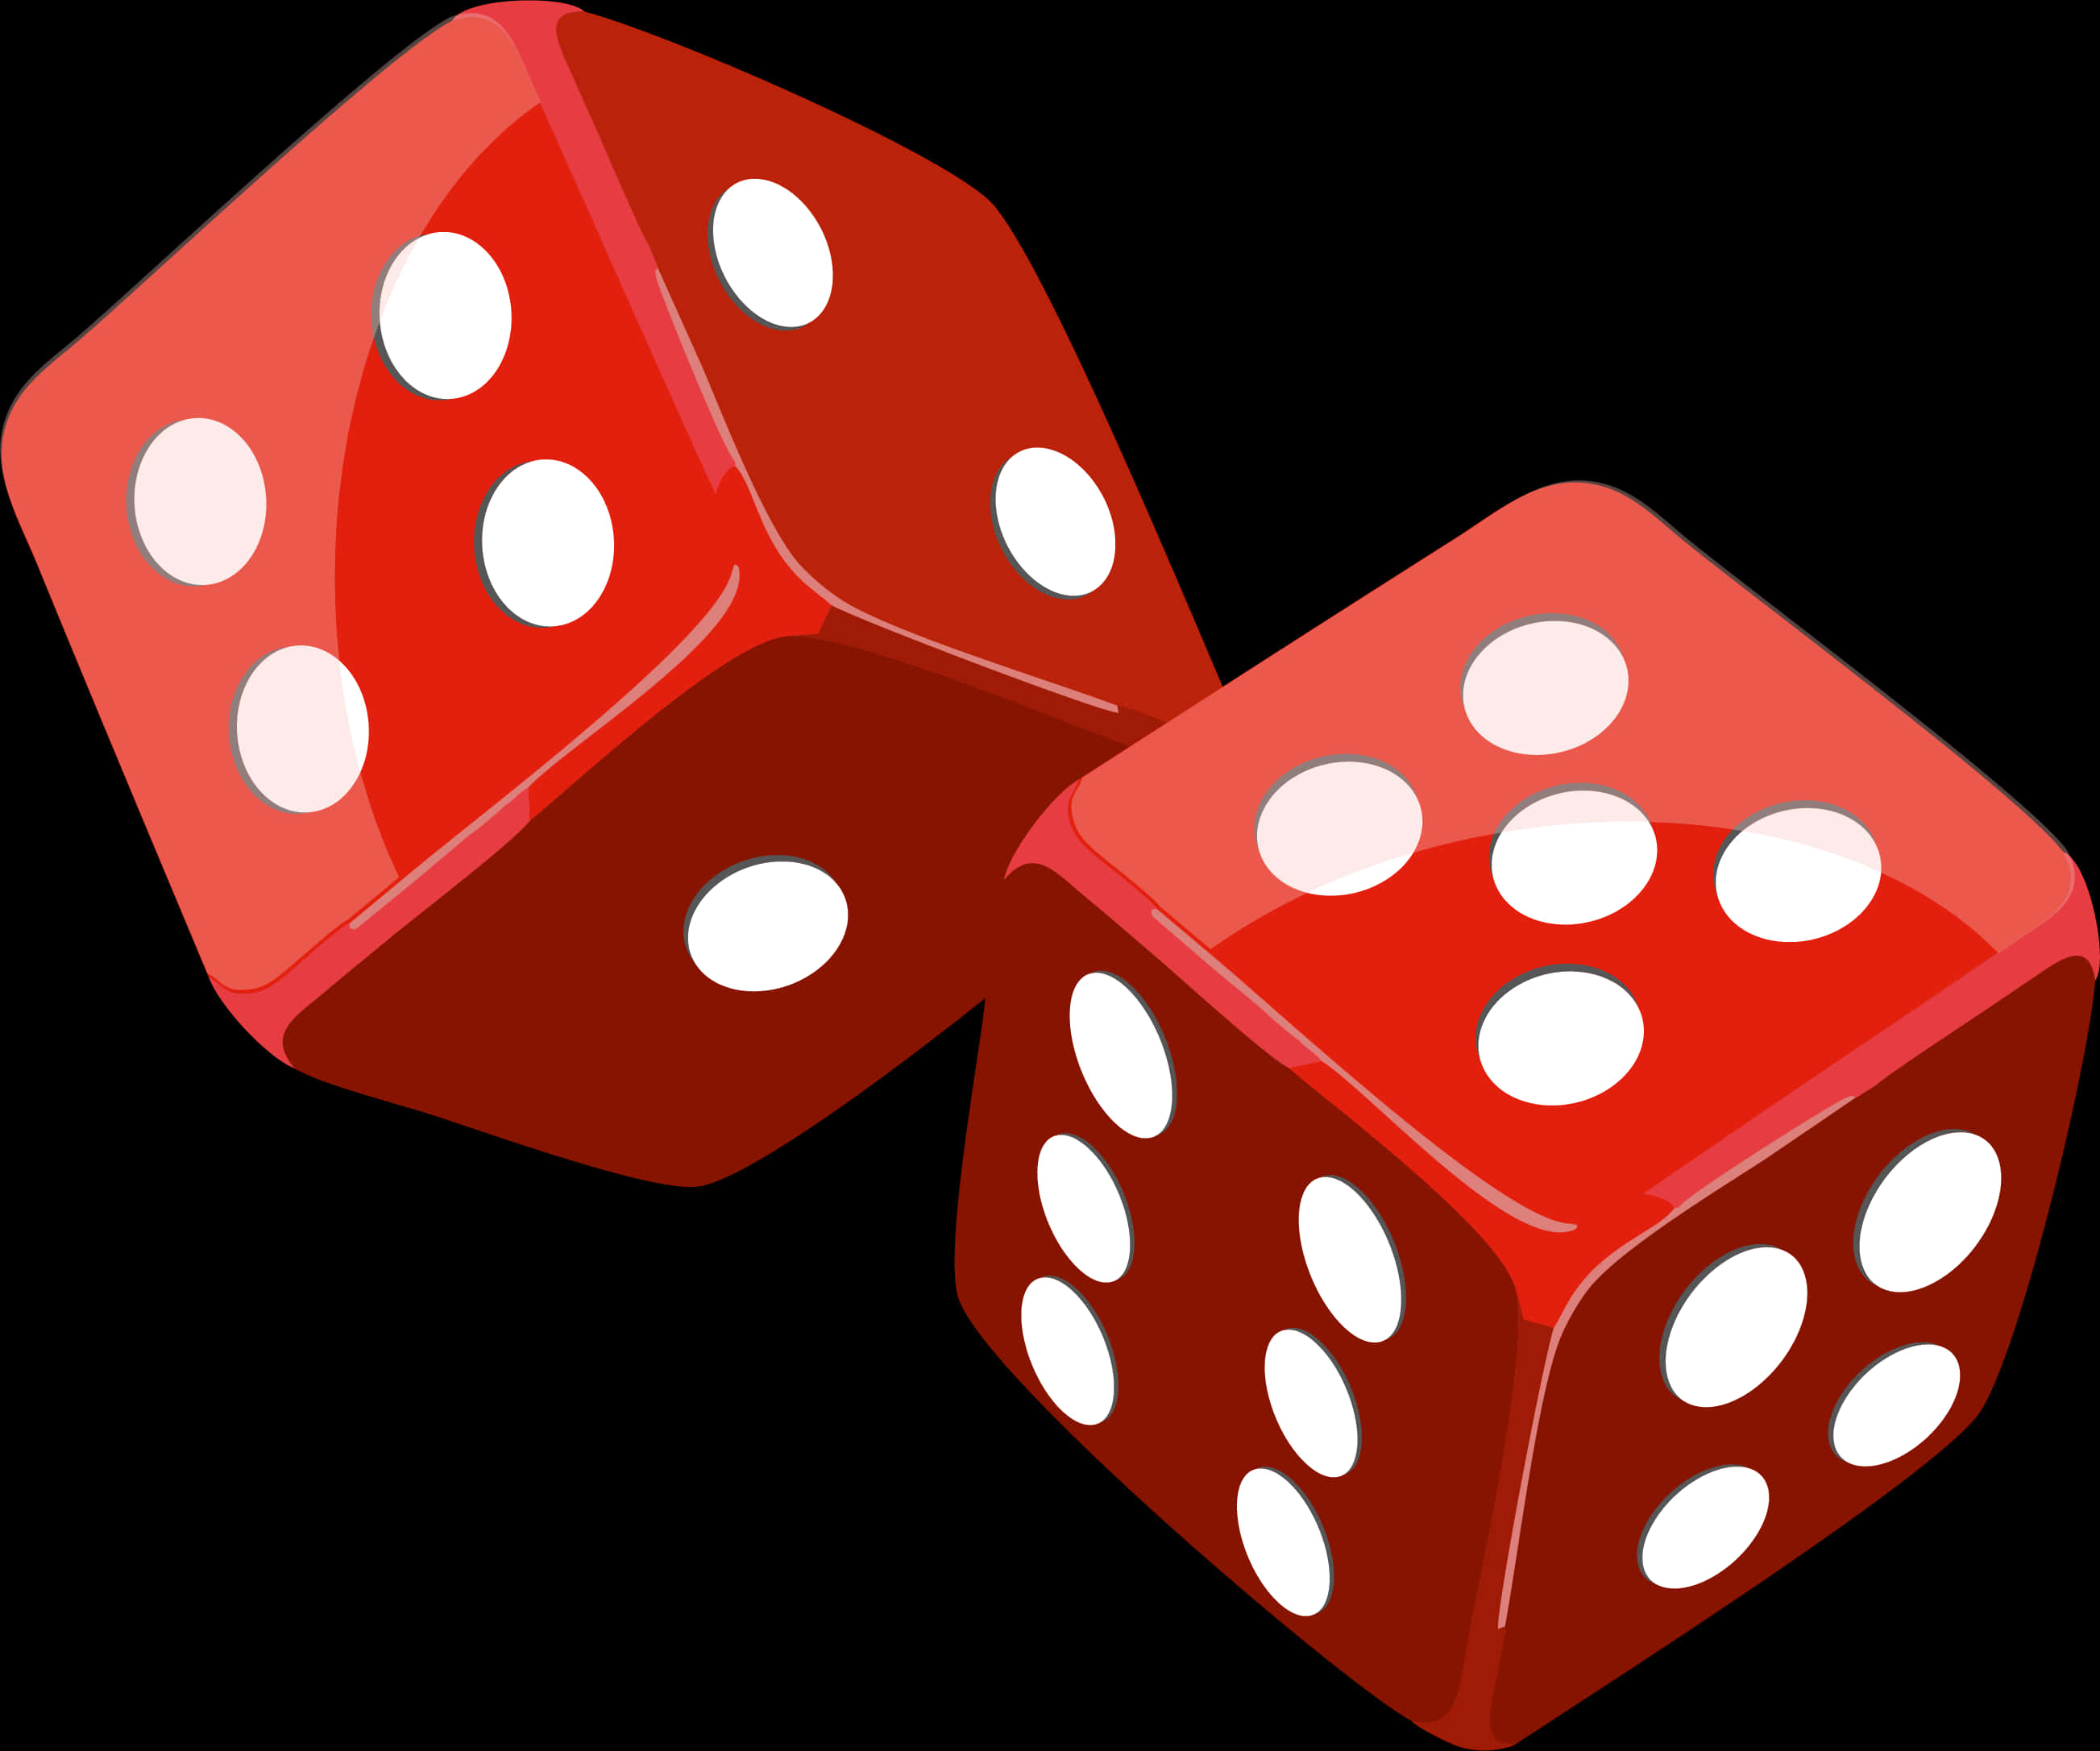 Red Dice Illustration PNG